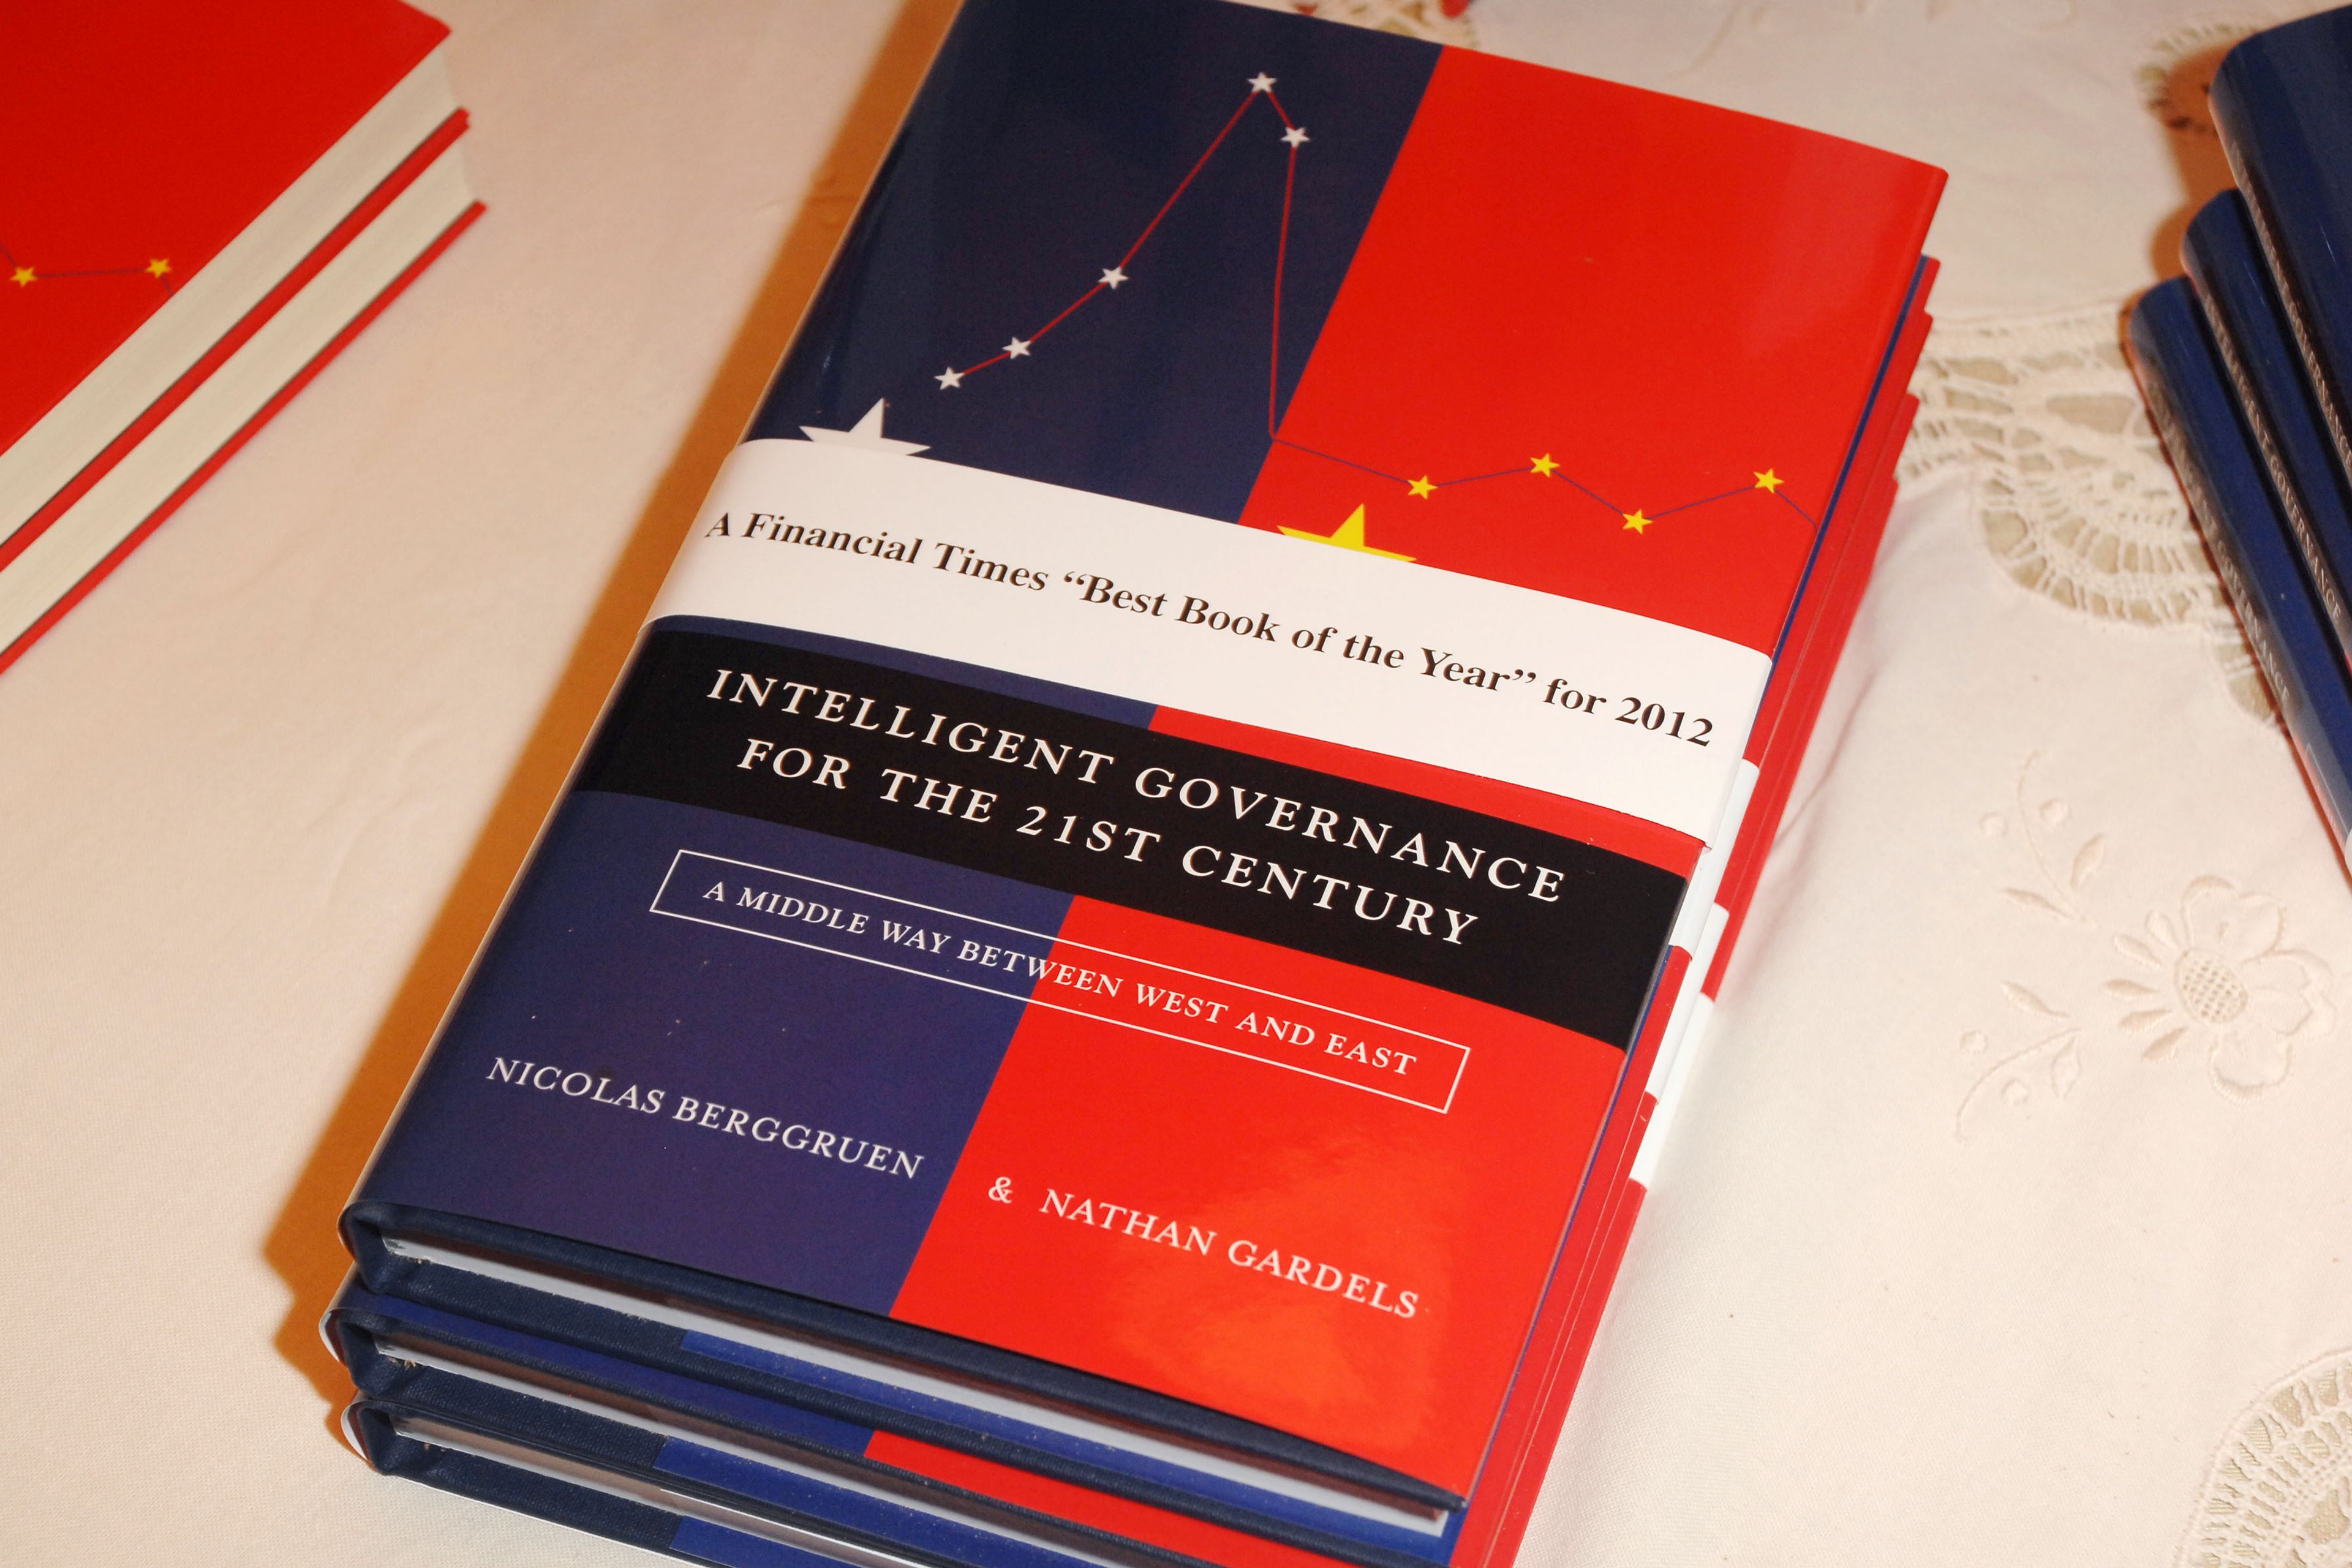 Book cover of "Intelligent Governance for the 21st Century: A Middle Way Between West and East"